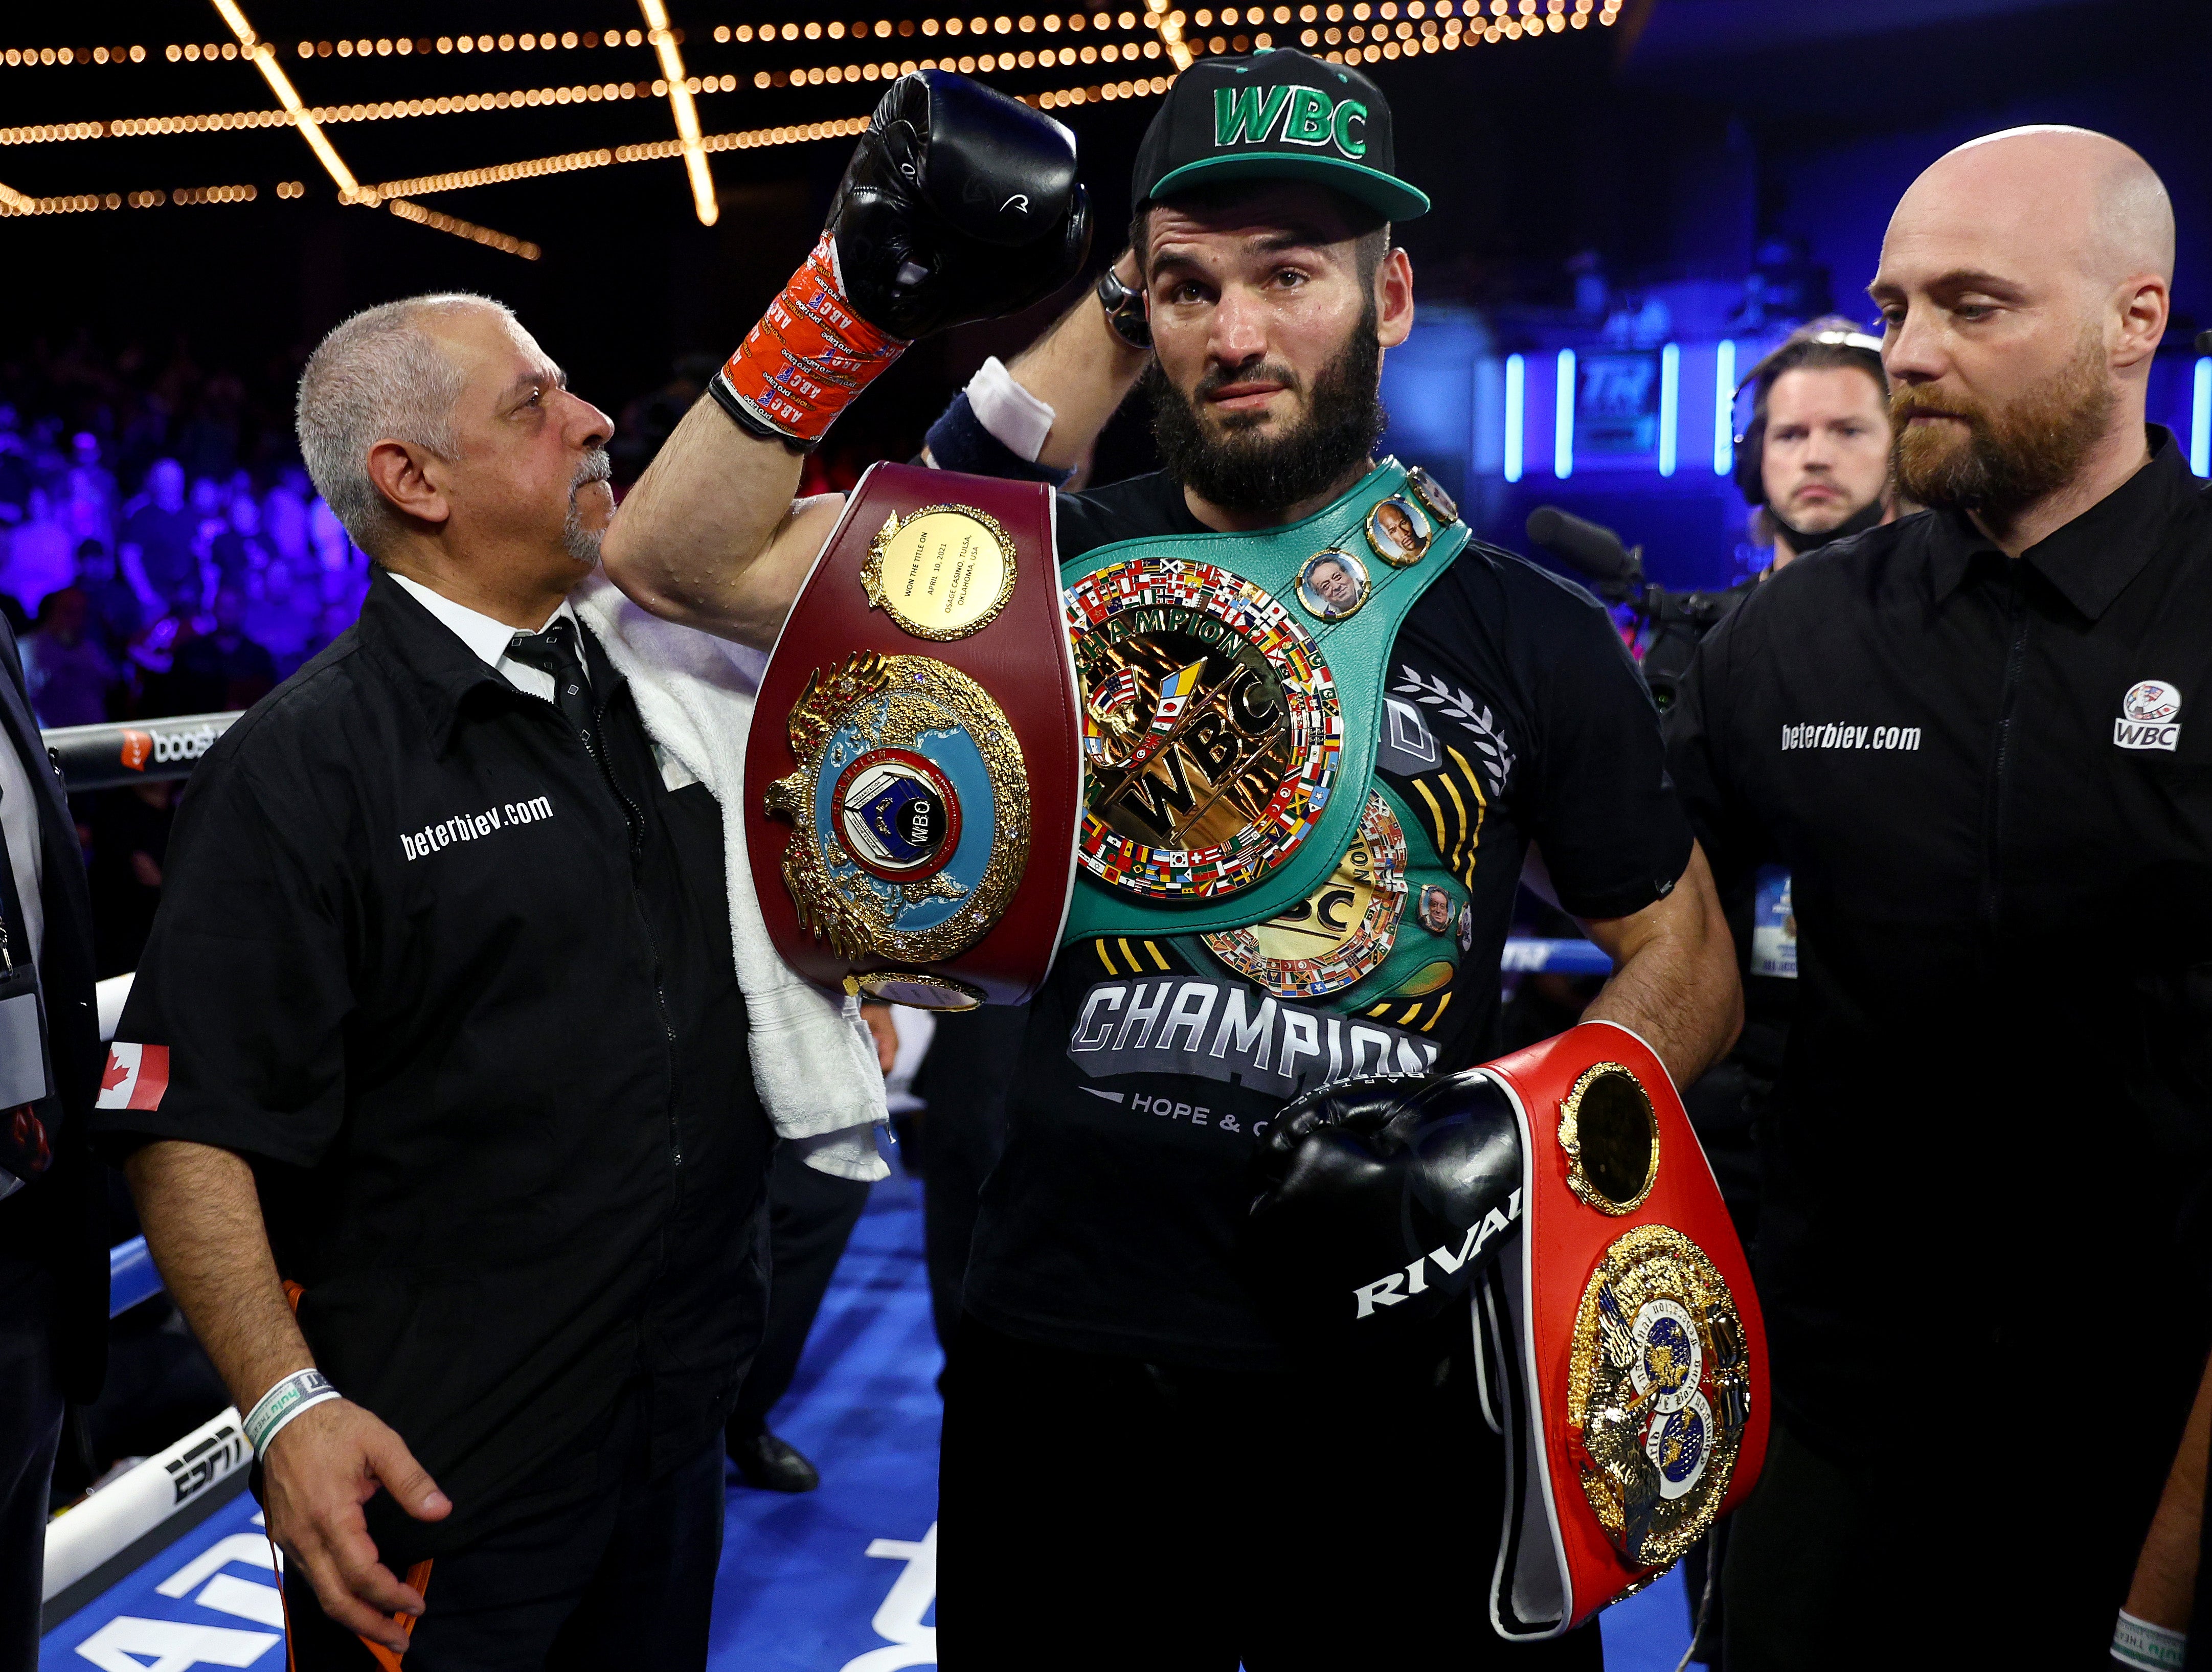 Beterbiev is on course for a unification bout with Dmitry Bivol – can Smith spoil those plans?